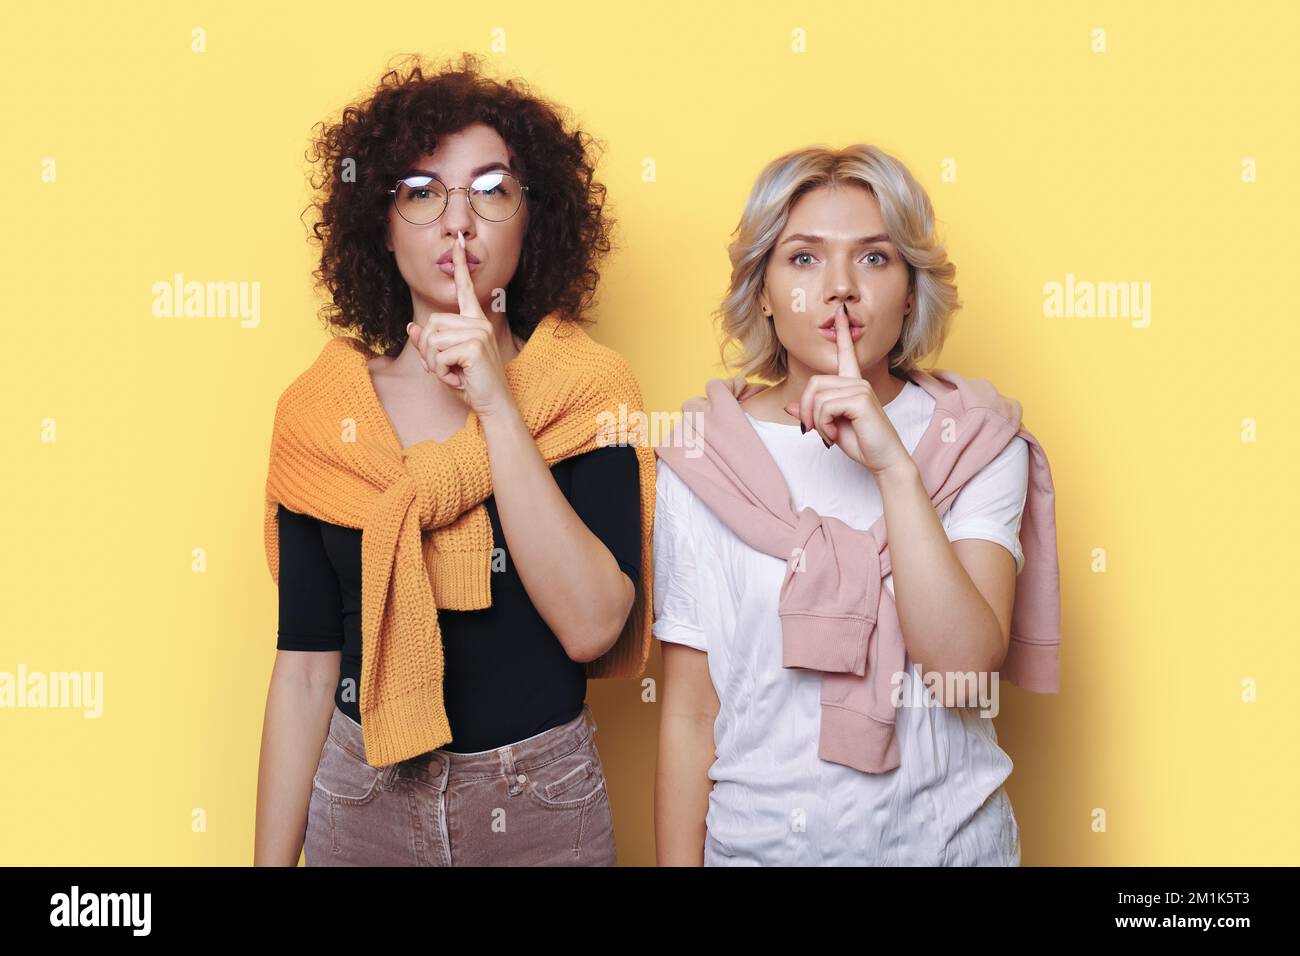 Two young women wearing casual clothes saying hush be quiet with finger on lips shhh gesture isolated on beige color background studio portrait. Stock Photo